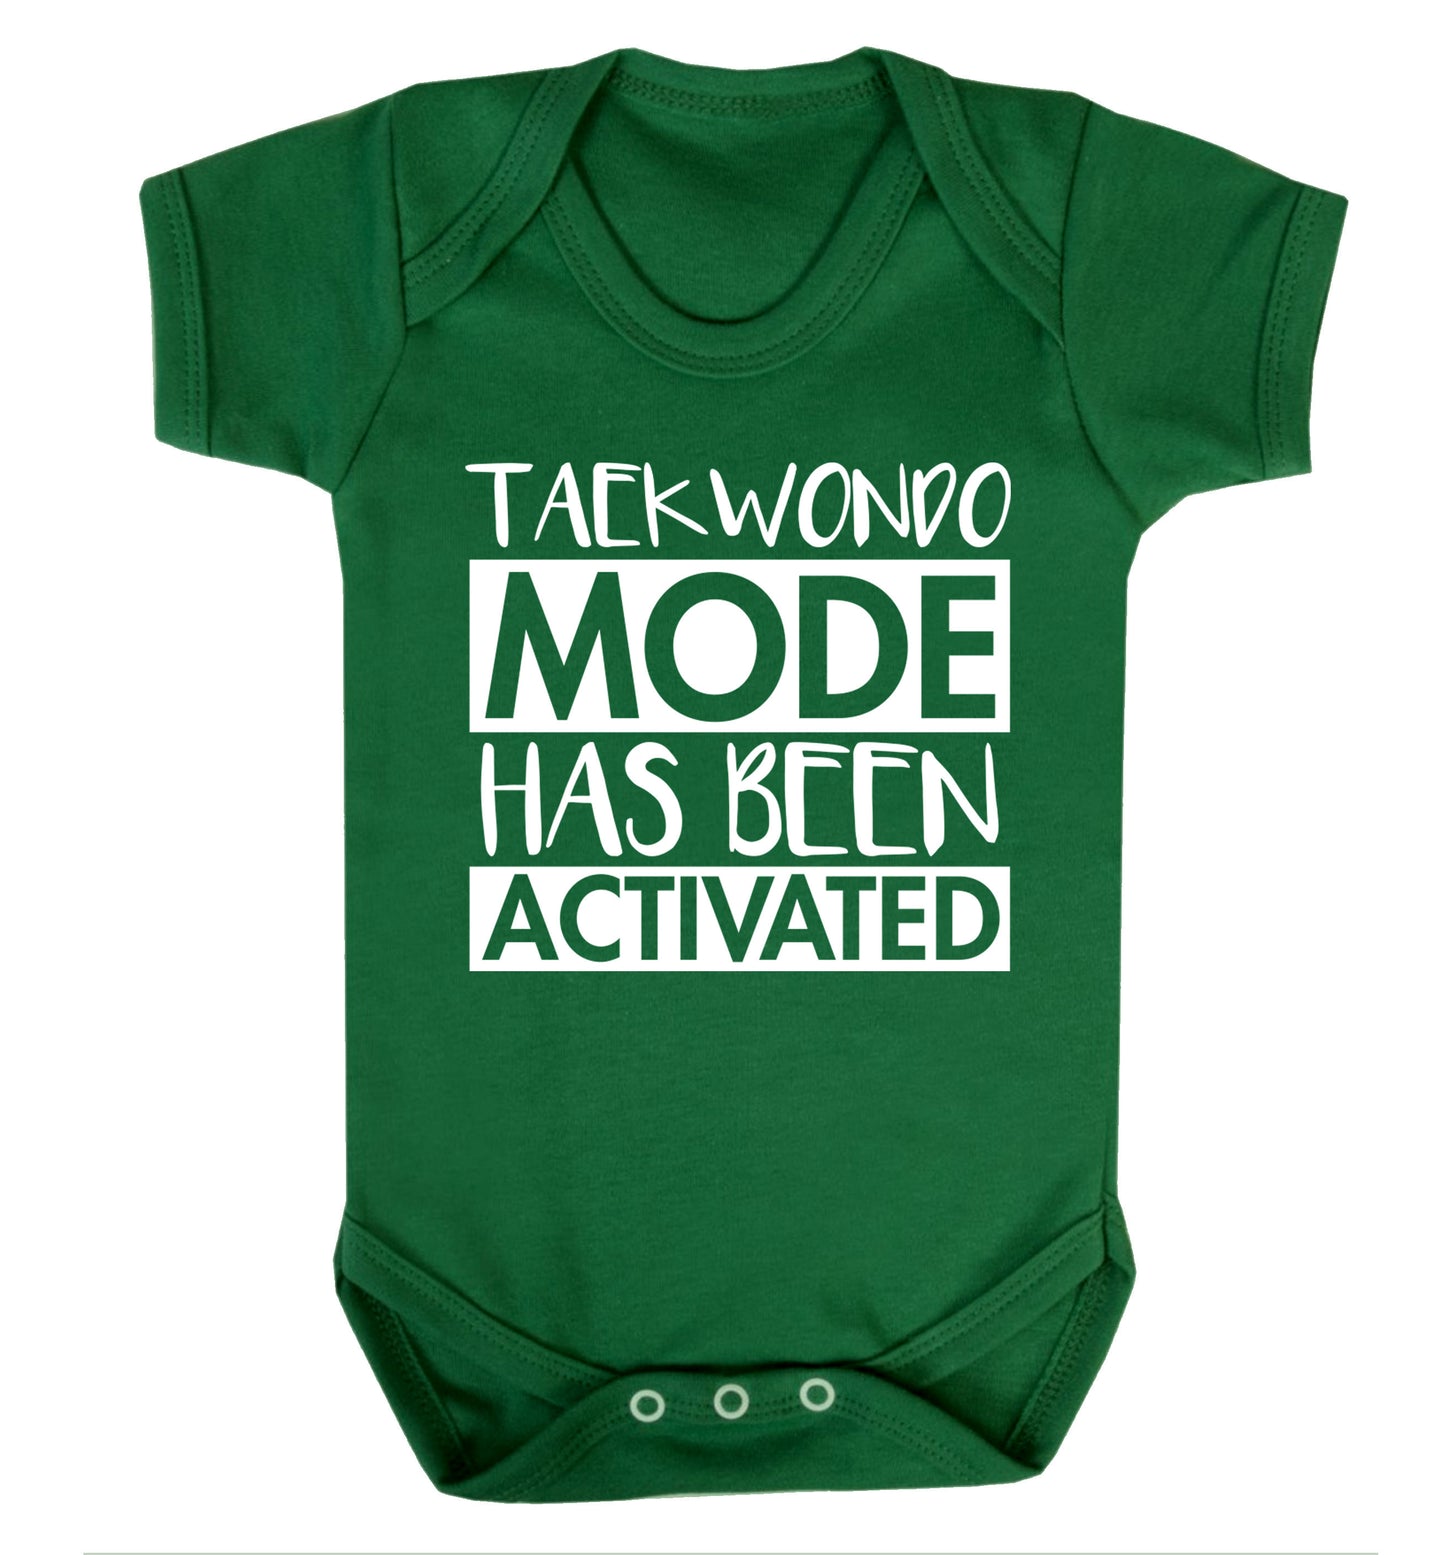 Taekwondo mode activated Baby Vest green 18-24 months